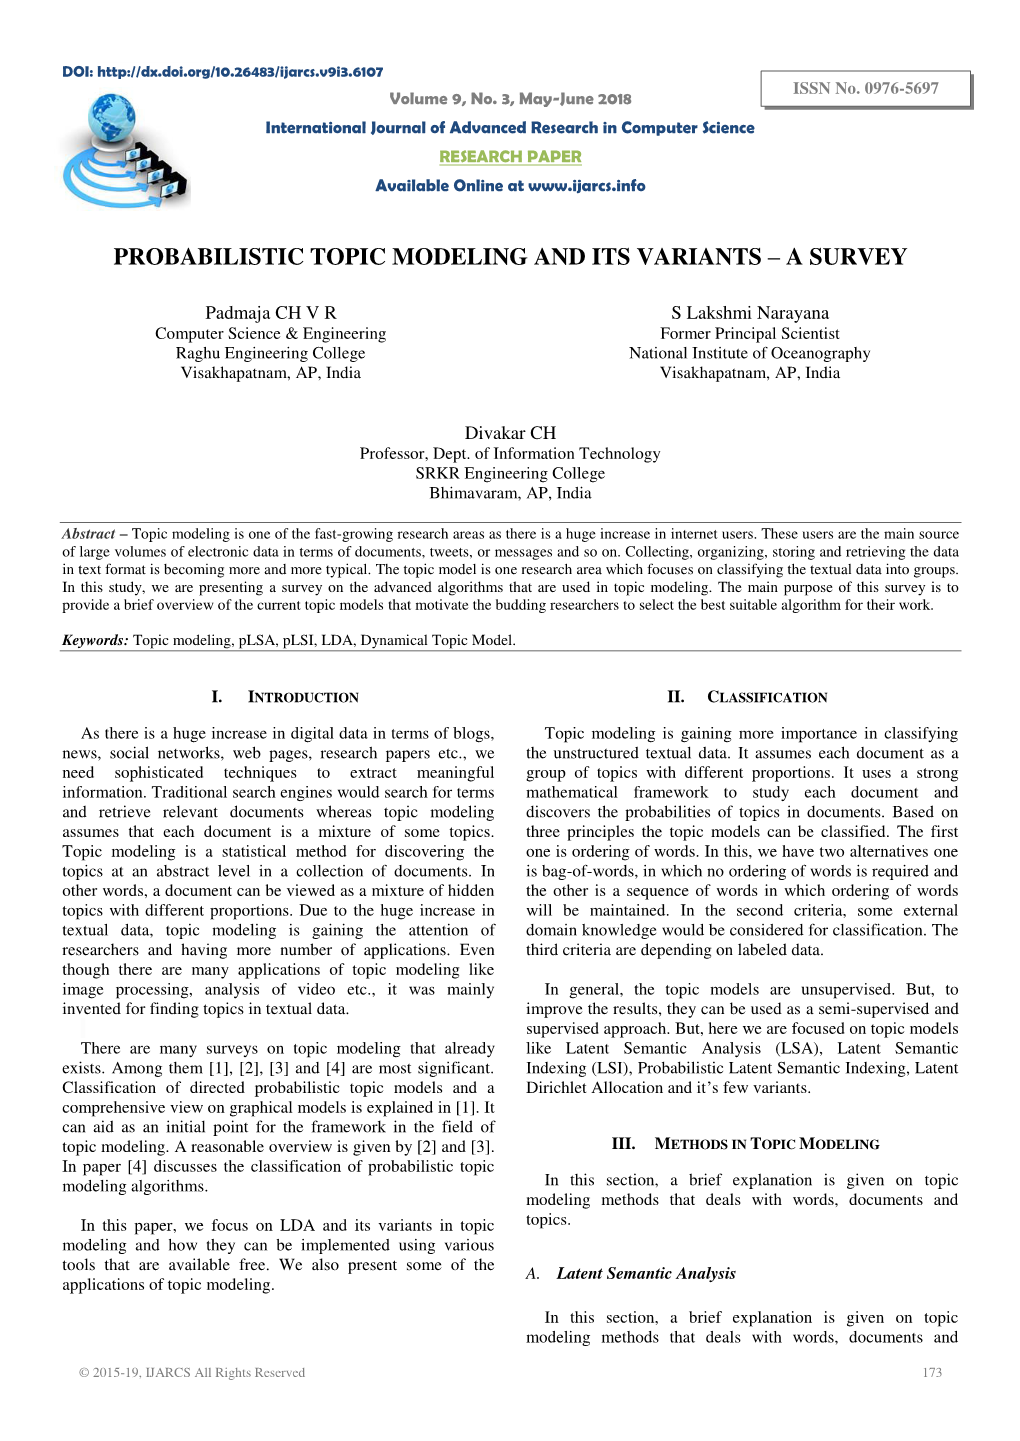 Probabilistic Topic Modeling and Its Variants – a Survey